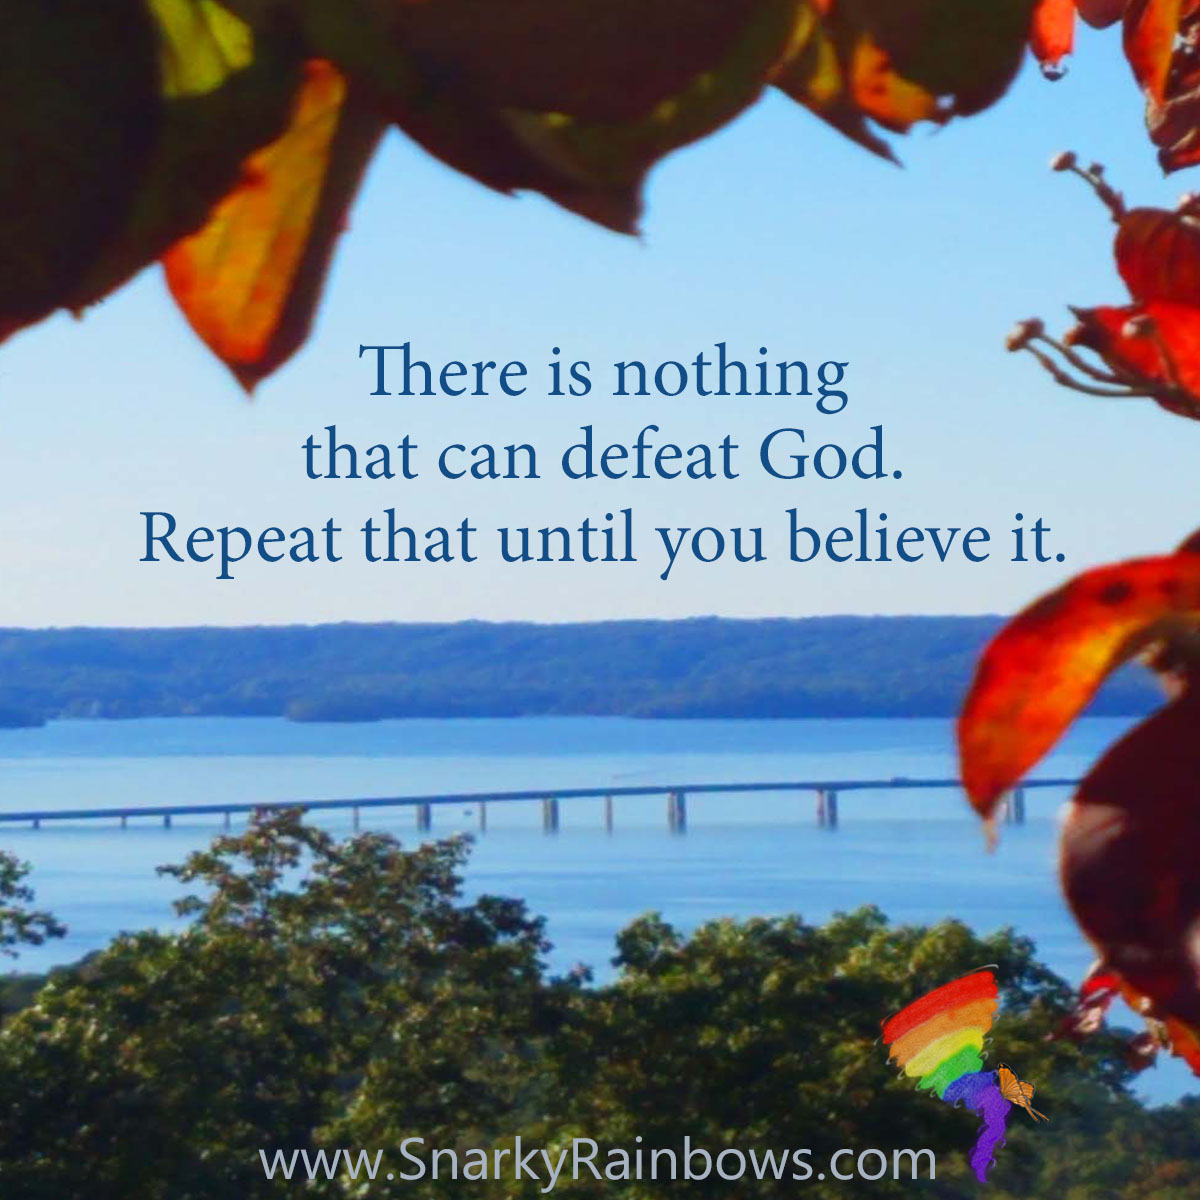 #QuoteoftheDay

There is nothing that can defeat God. 
Repeat that until you believe it.